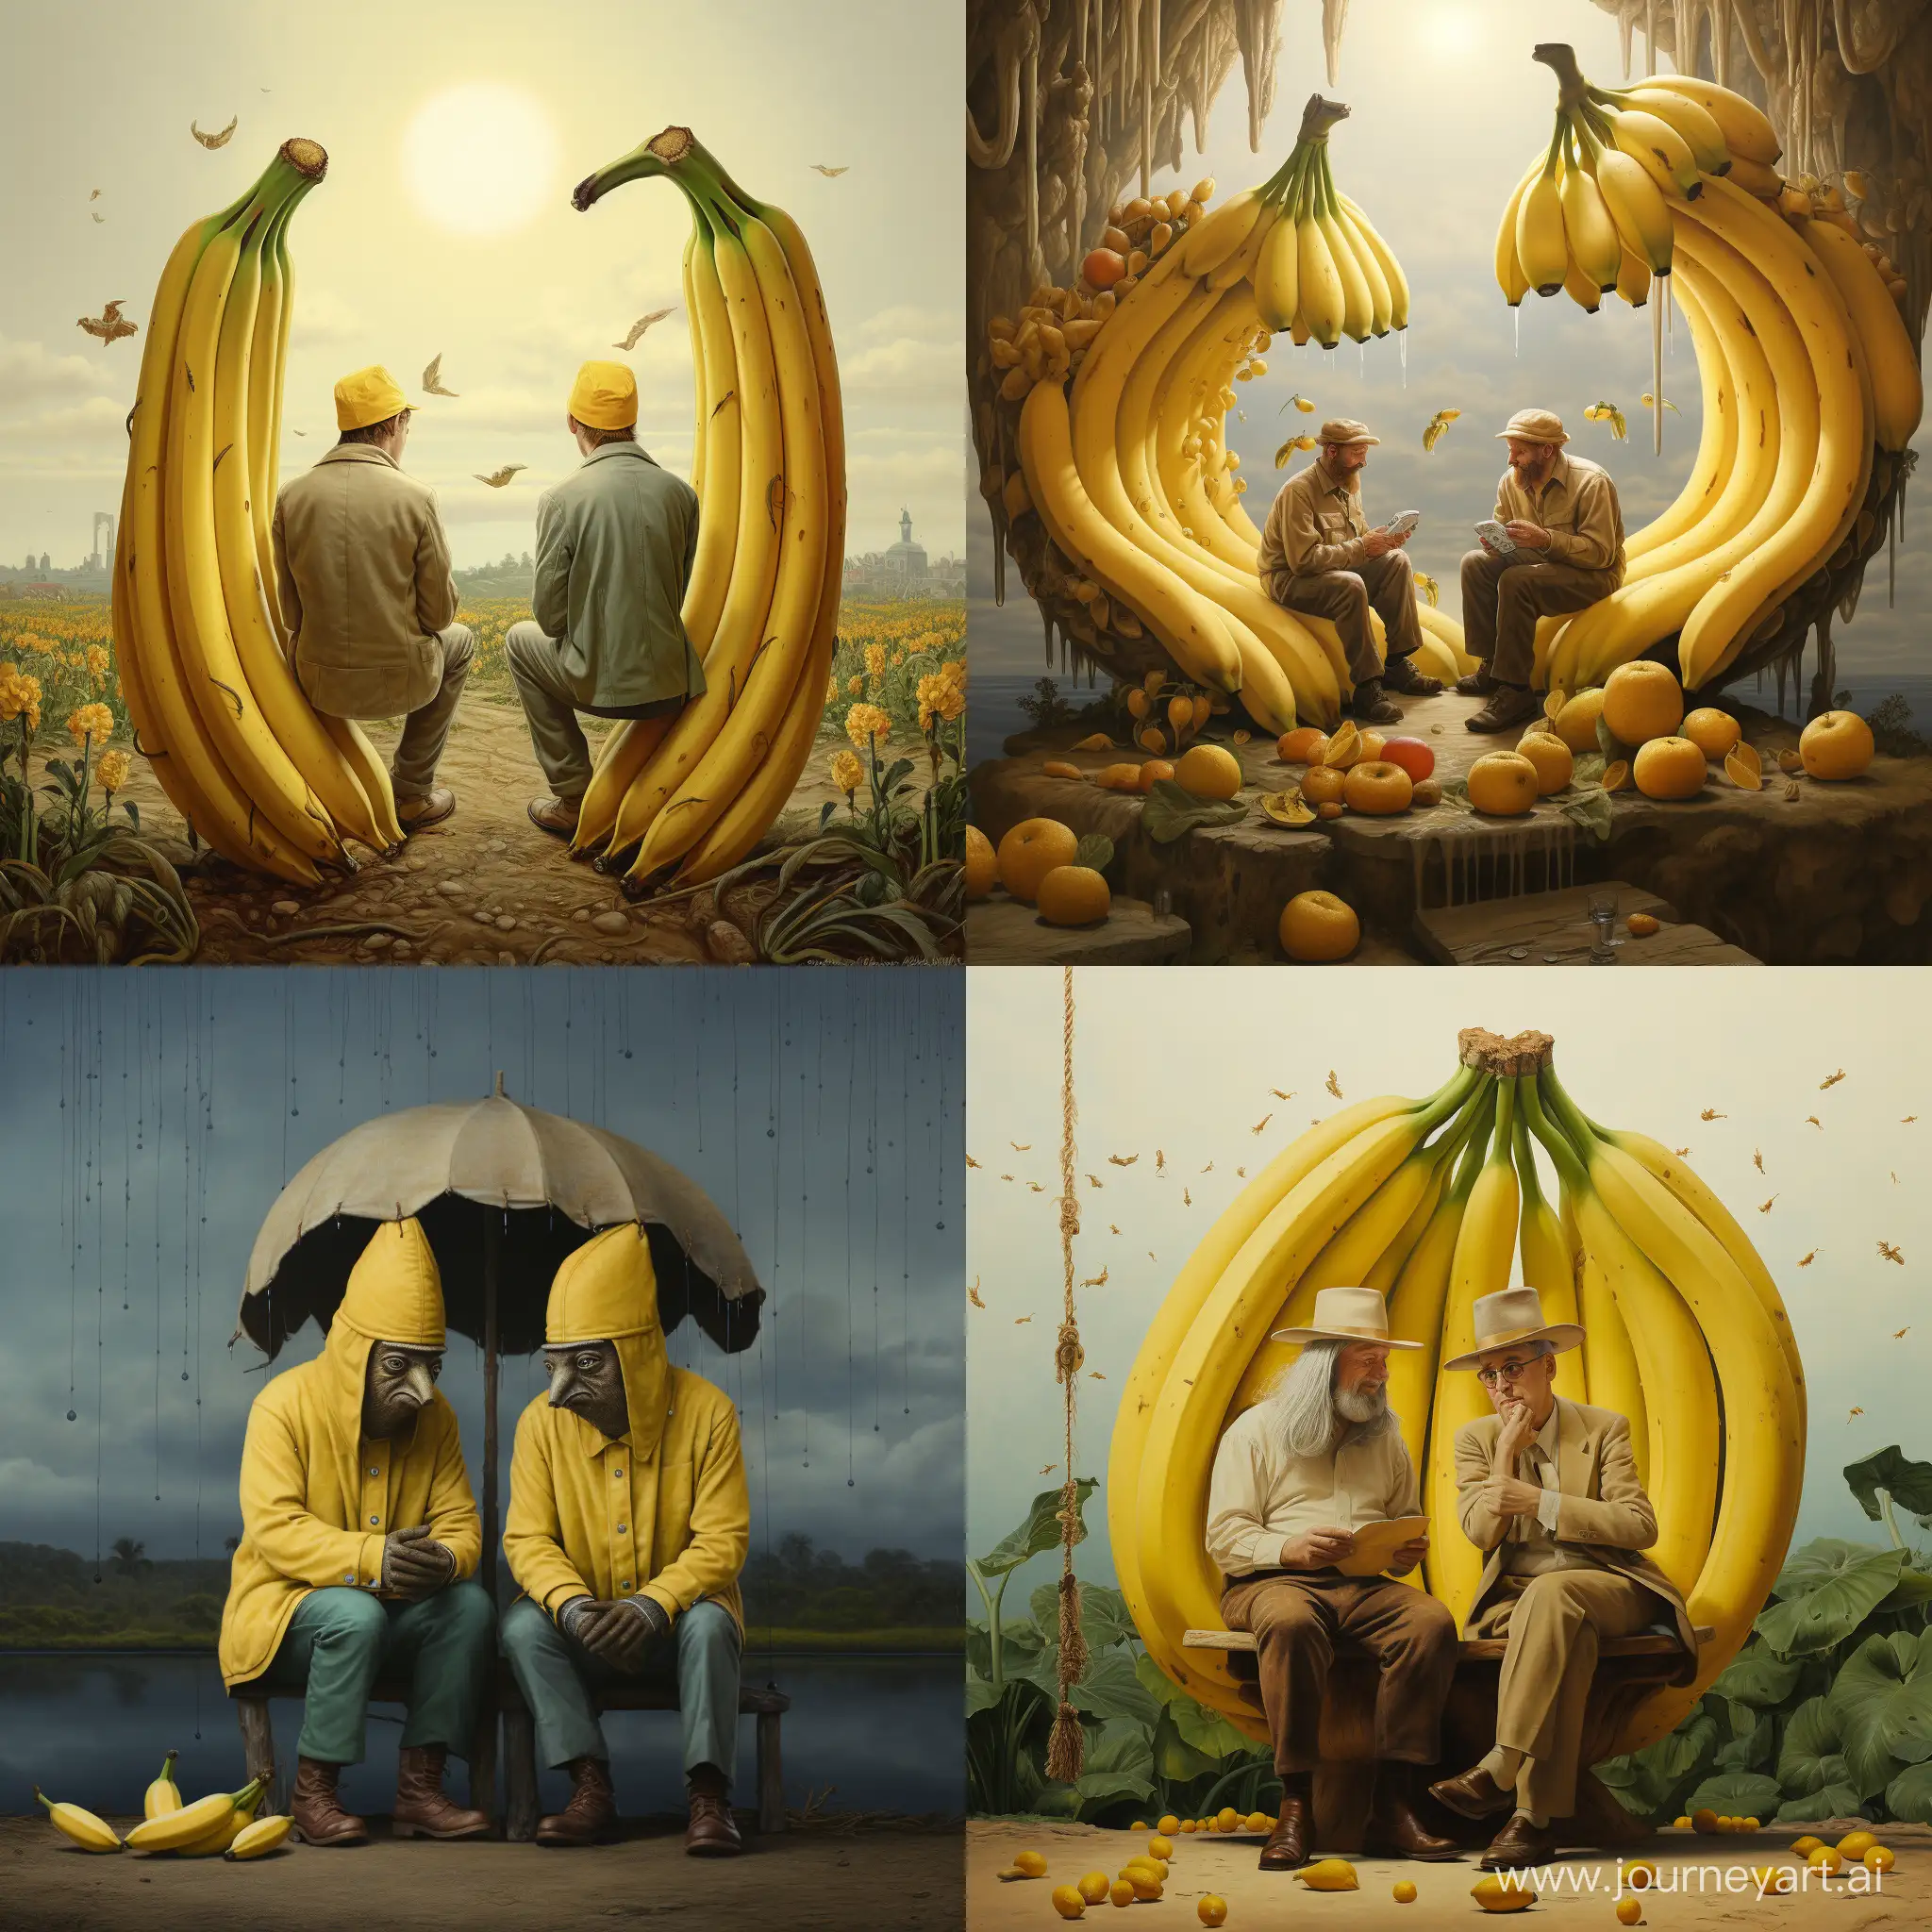 Philosophical-Banter-Two-Bananas-Engaged-in-a-Lifes-Meaning-Debate